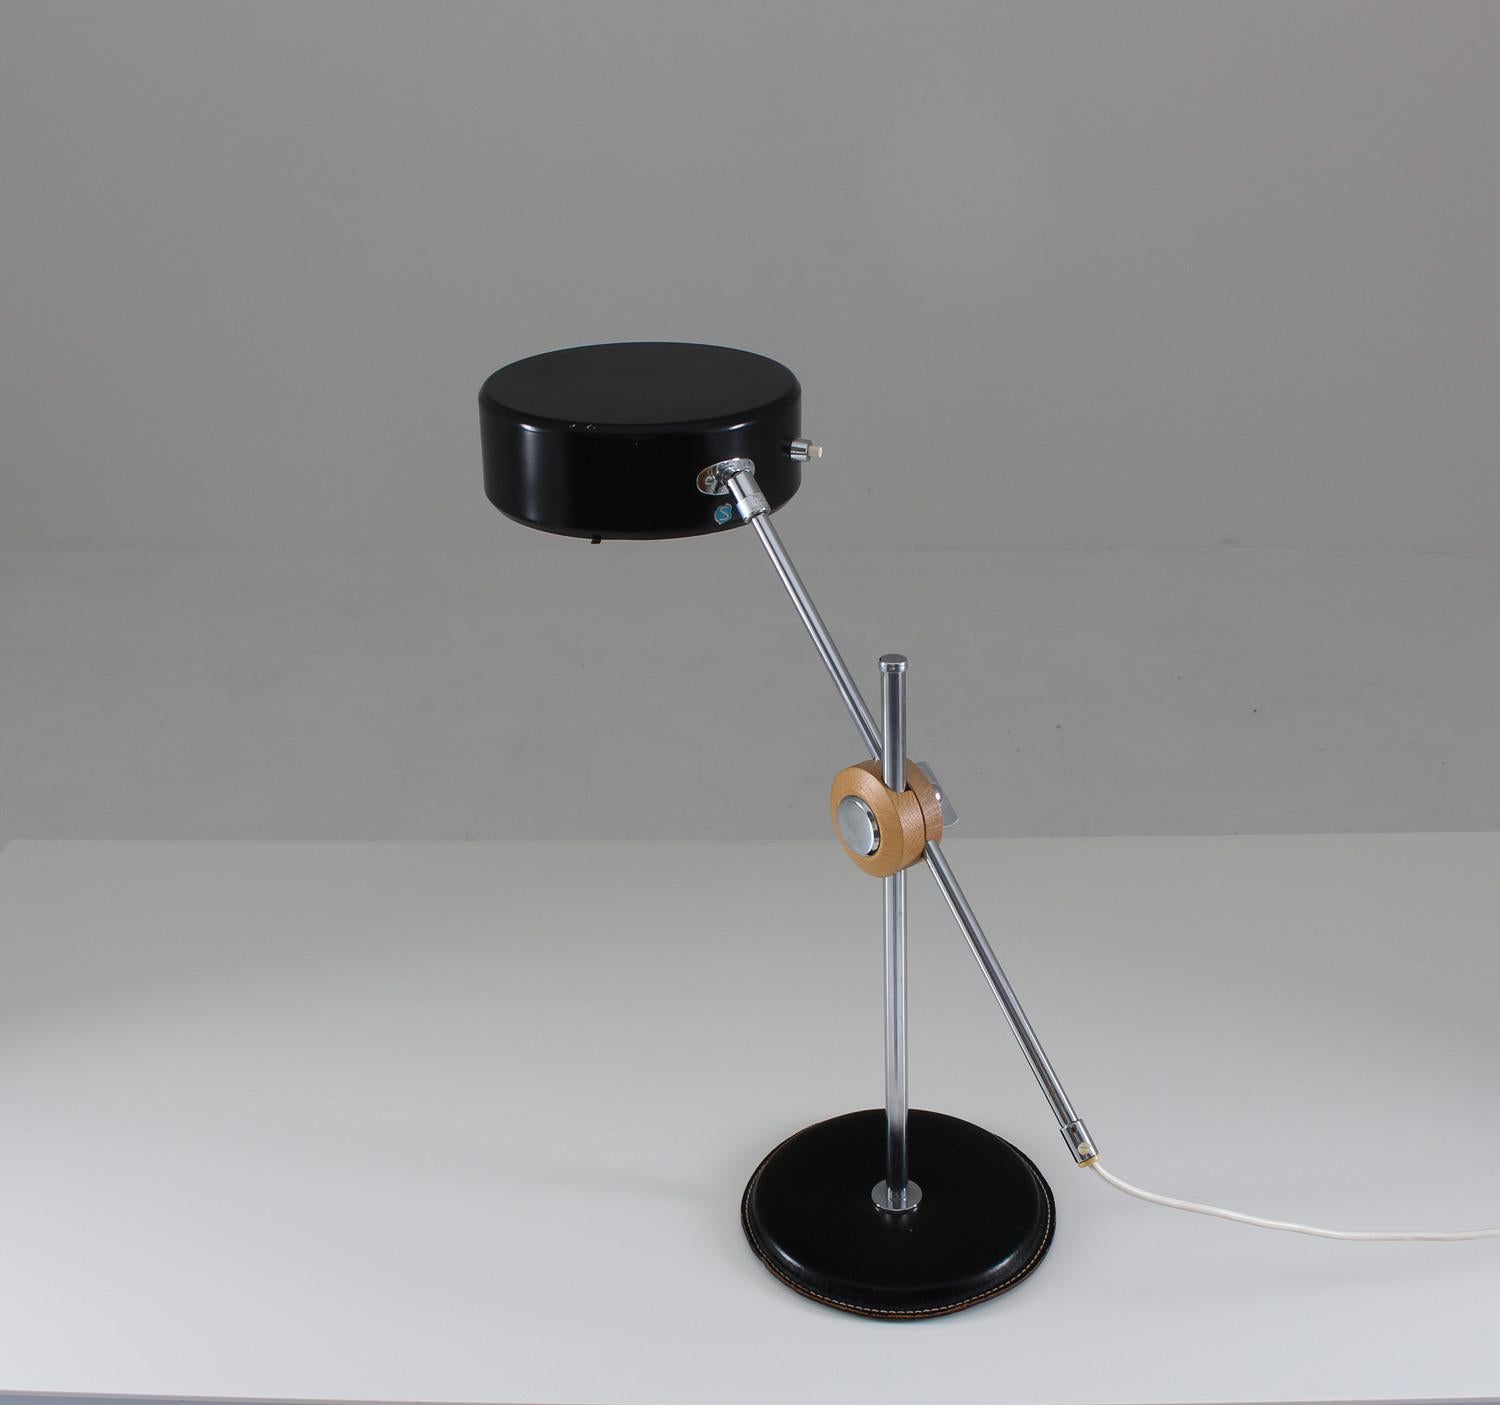 Desk lamp model 781 by Anders Pehrsons for Ateljé Lyktan.
This lamp was designed in the early 1970s, known for being used at the Olympic games in Münich 1972.
It is adjustable in any direction and features two light sources that can be lit